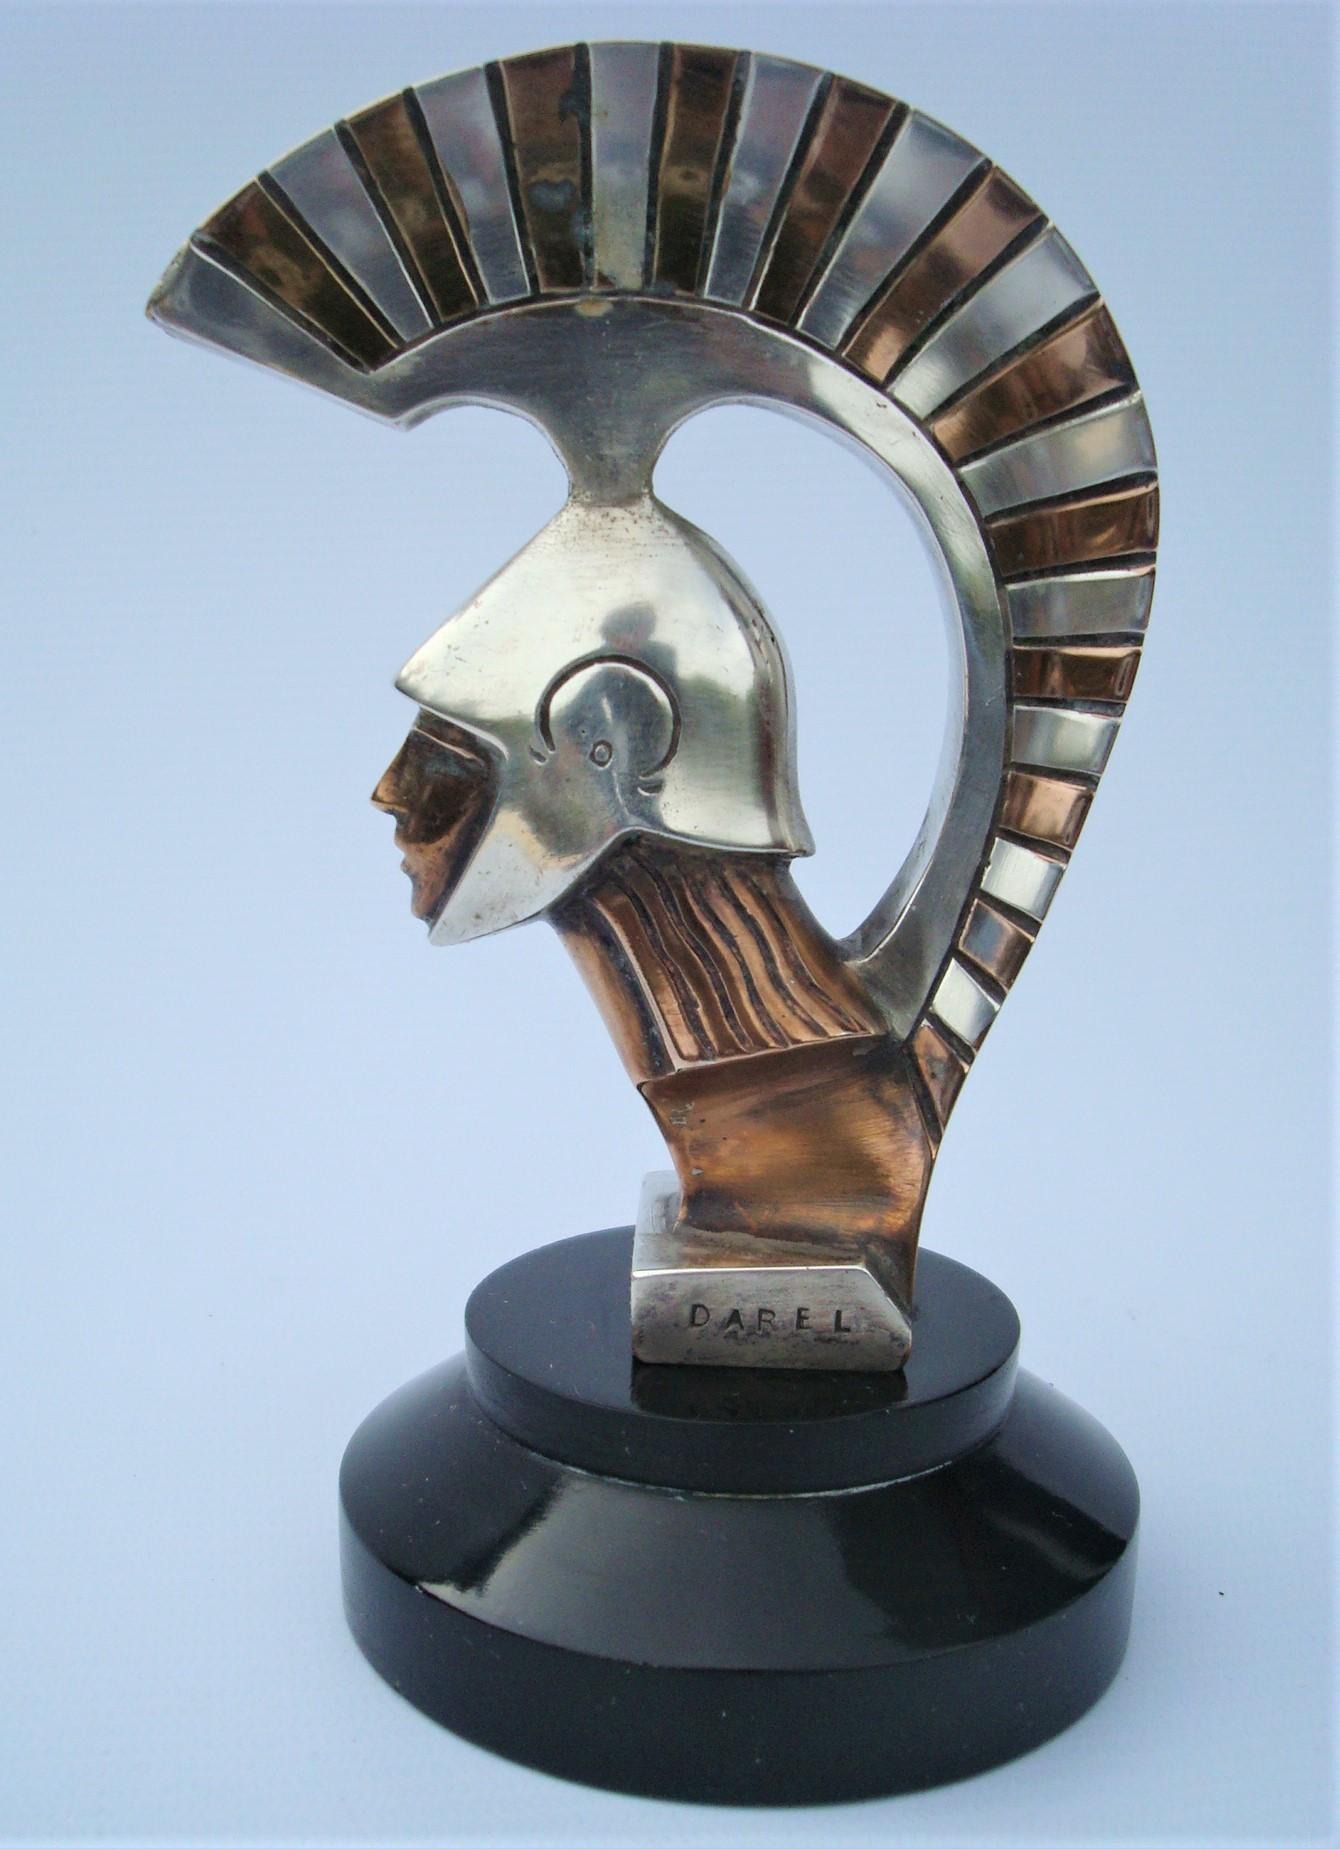 Art Deco Roman warrior car mascot - Hood Ornament by Darel, ca. 1920s
Guerrier by Darel. Perfect desk accesorie or paperweight.